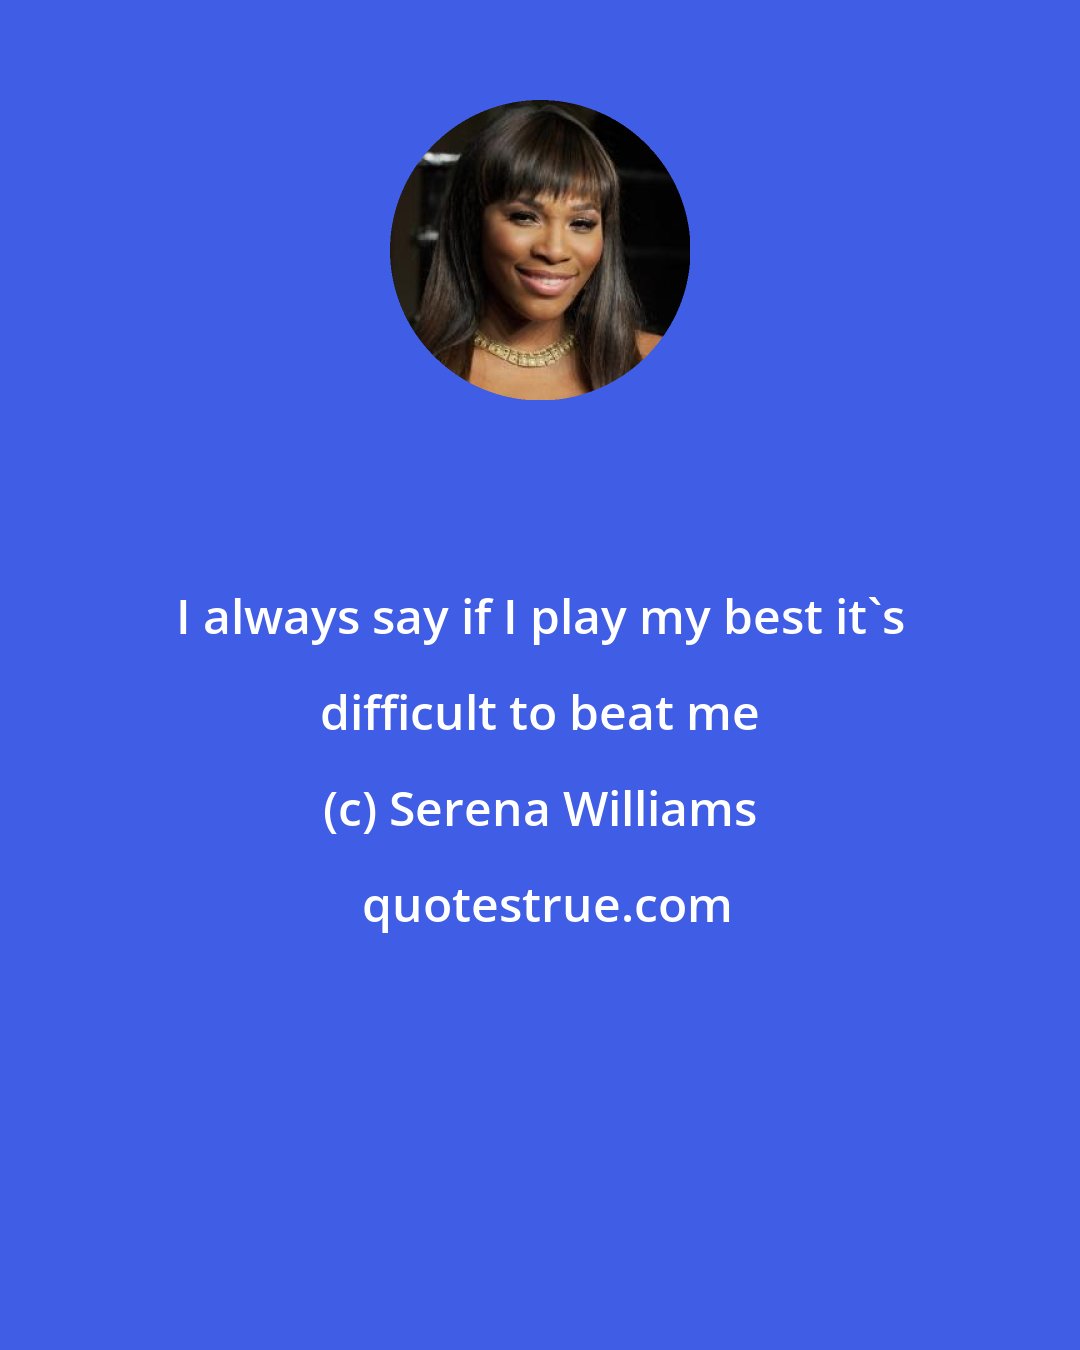 Serena Williams: I always say if I play my best it's difficult to beat me